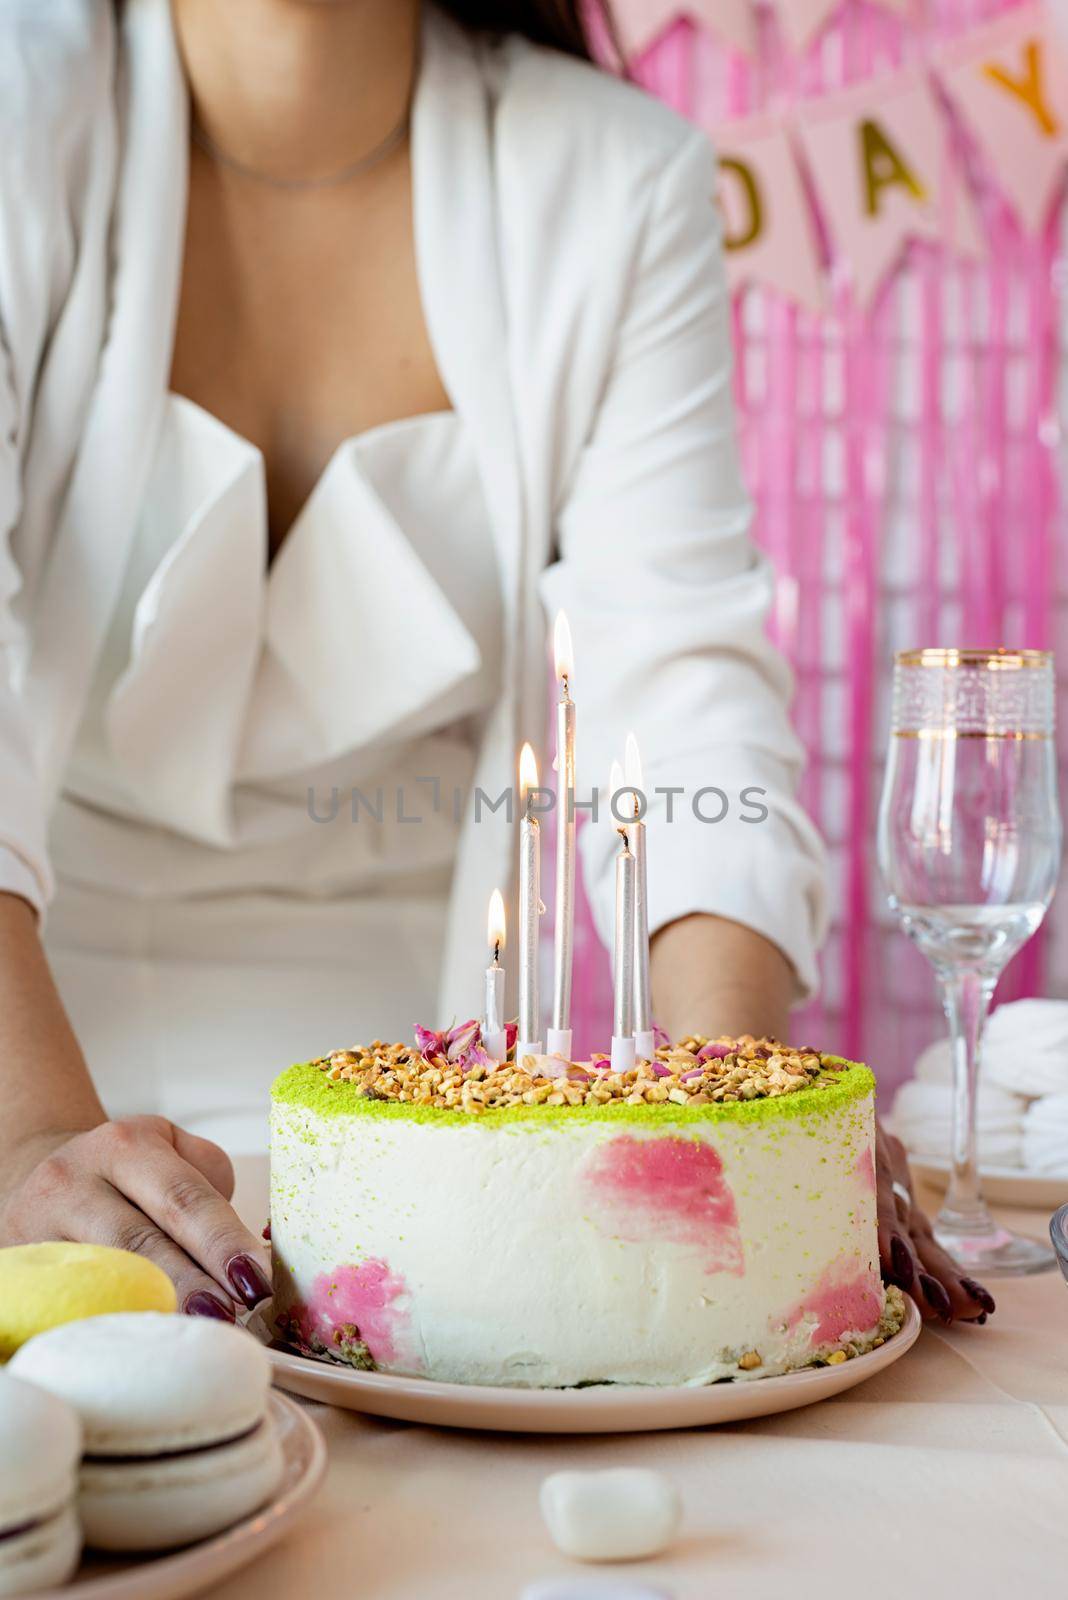 Birthday party. Birthday tables. Attractive woman in white party clothes preparing birthday table with cakes, cakepops, macarons and other sweets, making wish